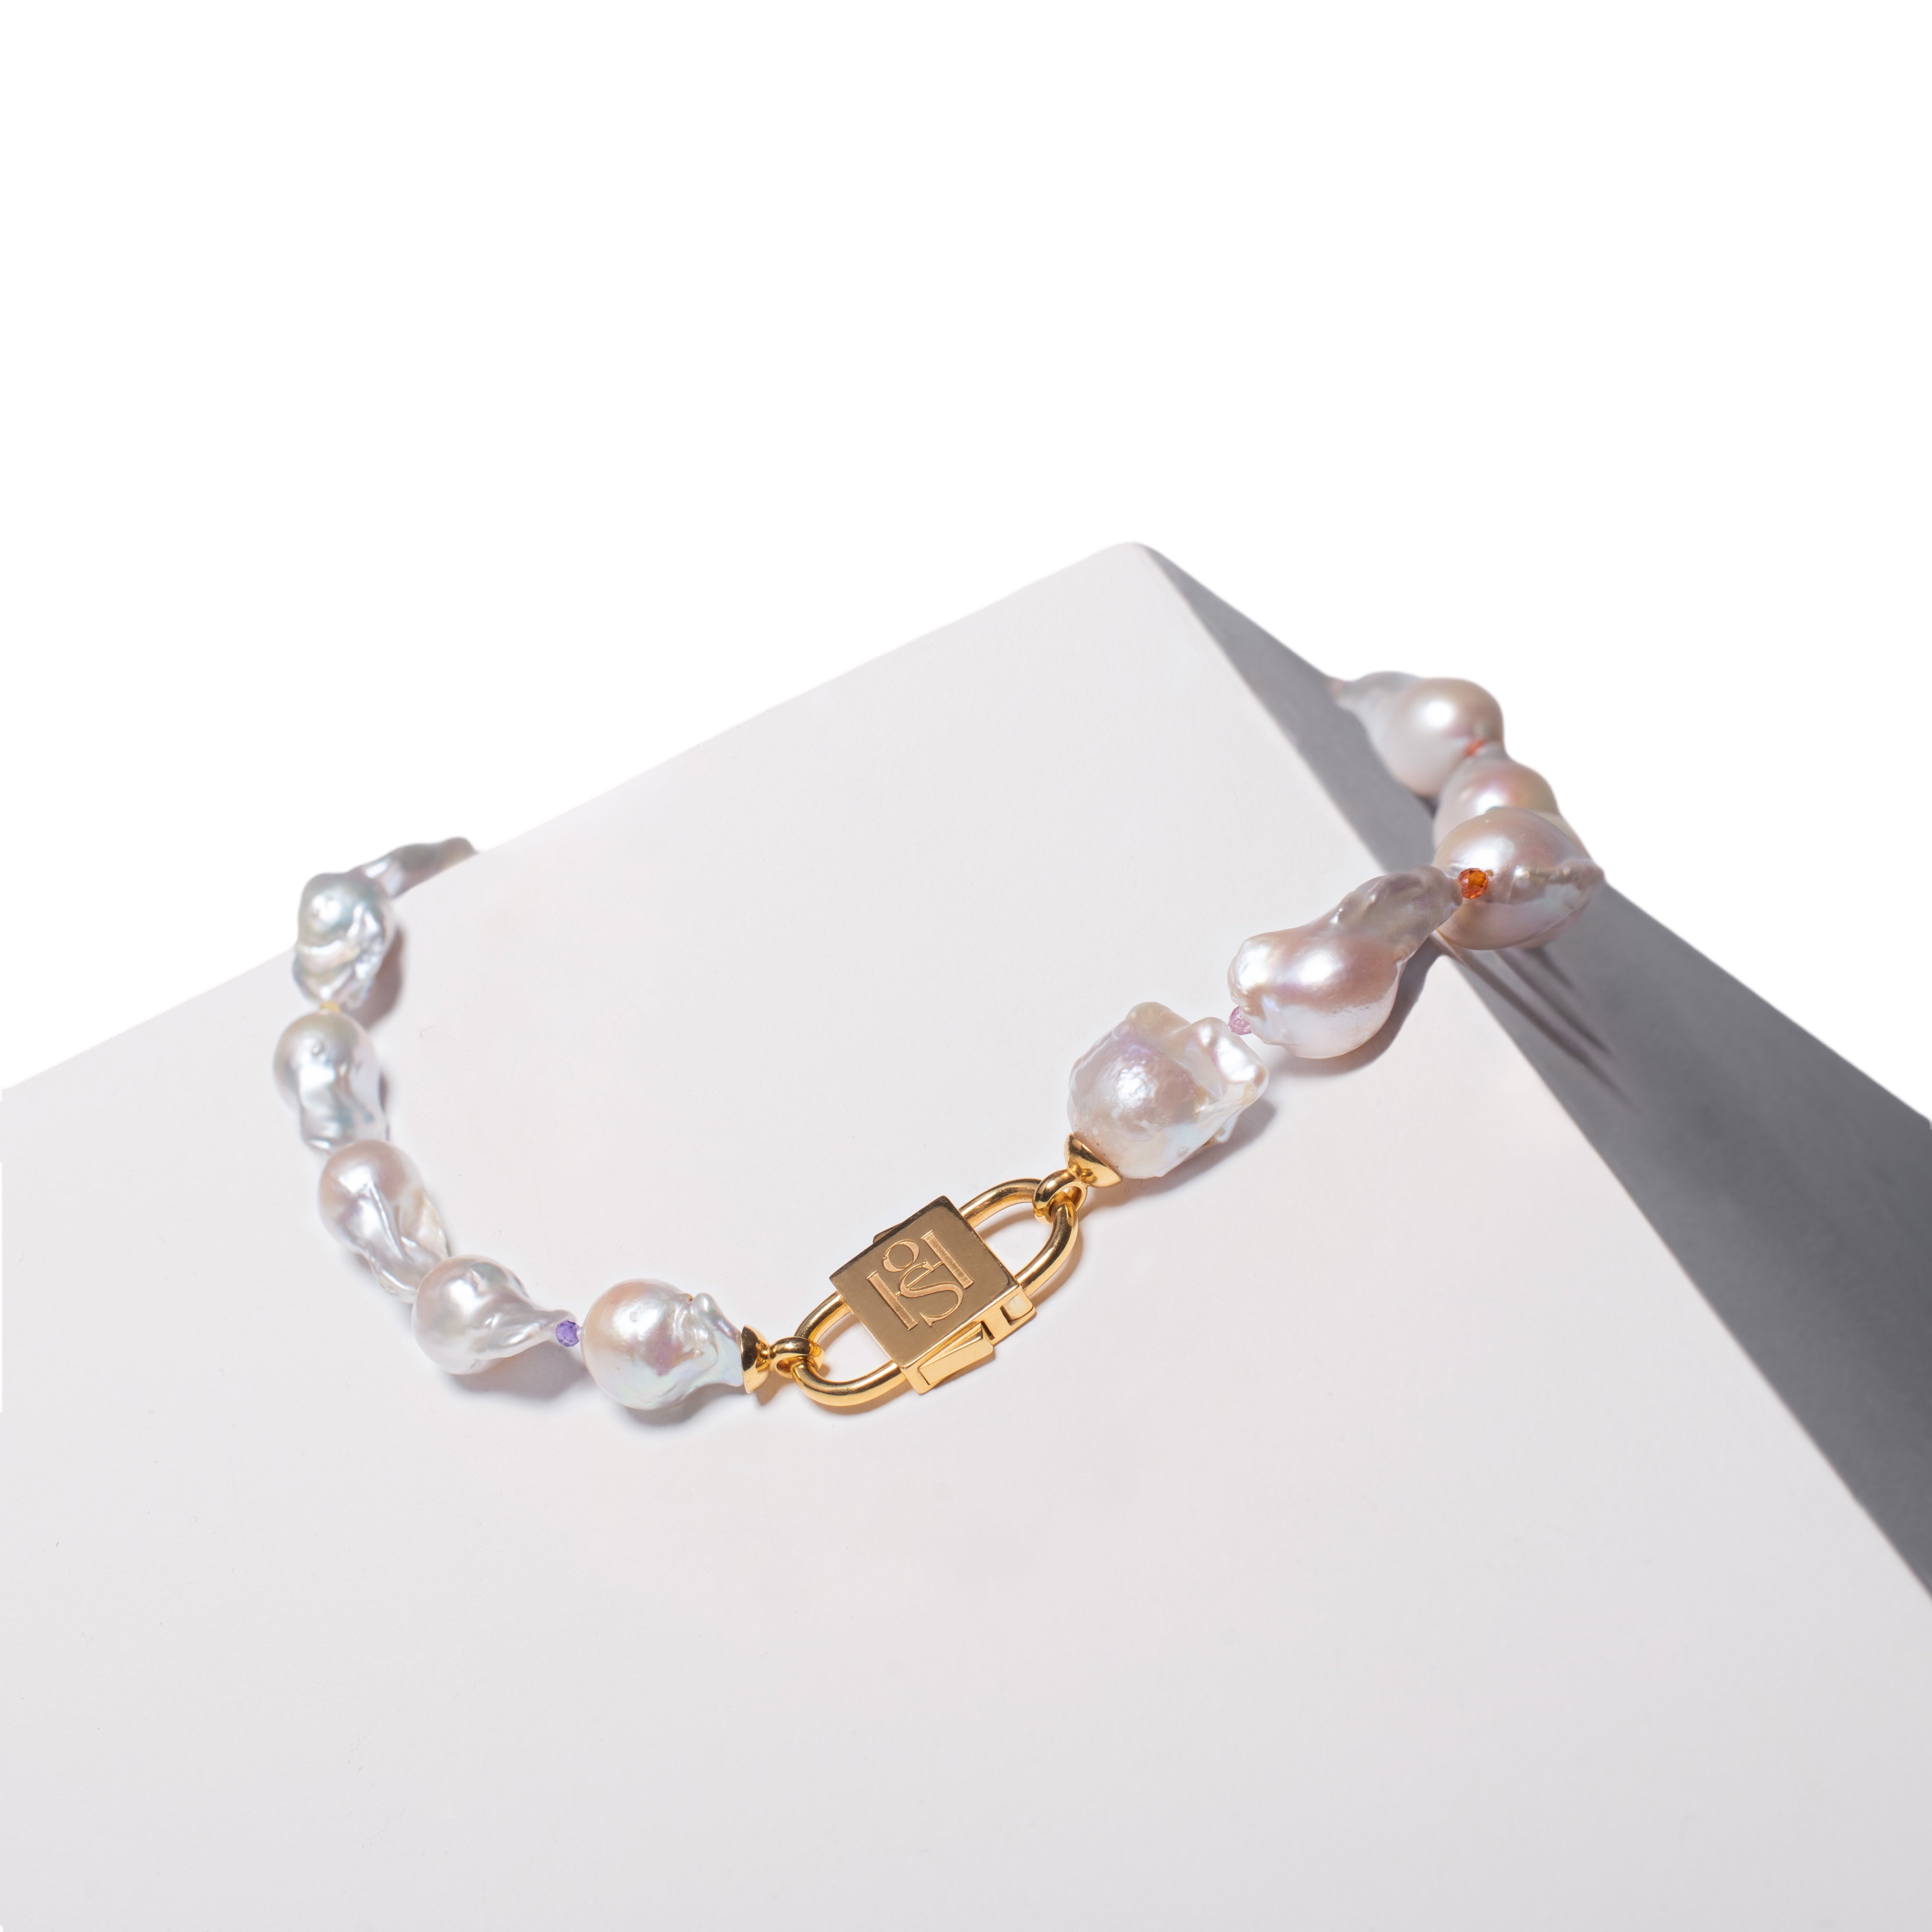 House of Sol Baroque Pearl Necklace with 24K Gold Filled HoS Lock